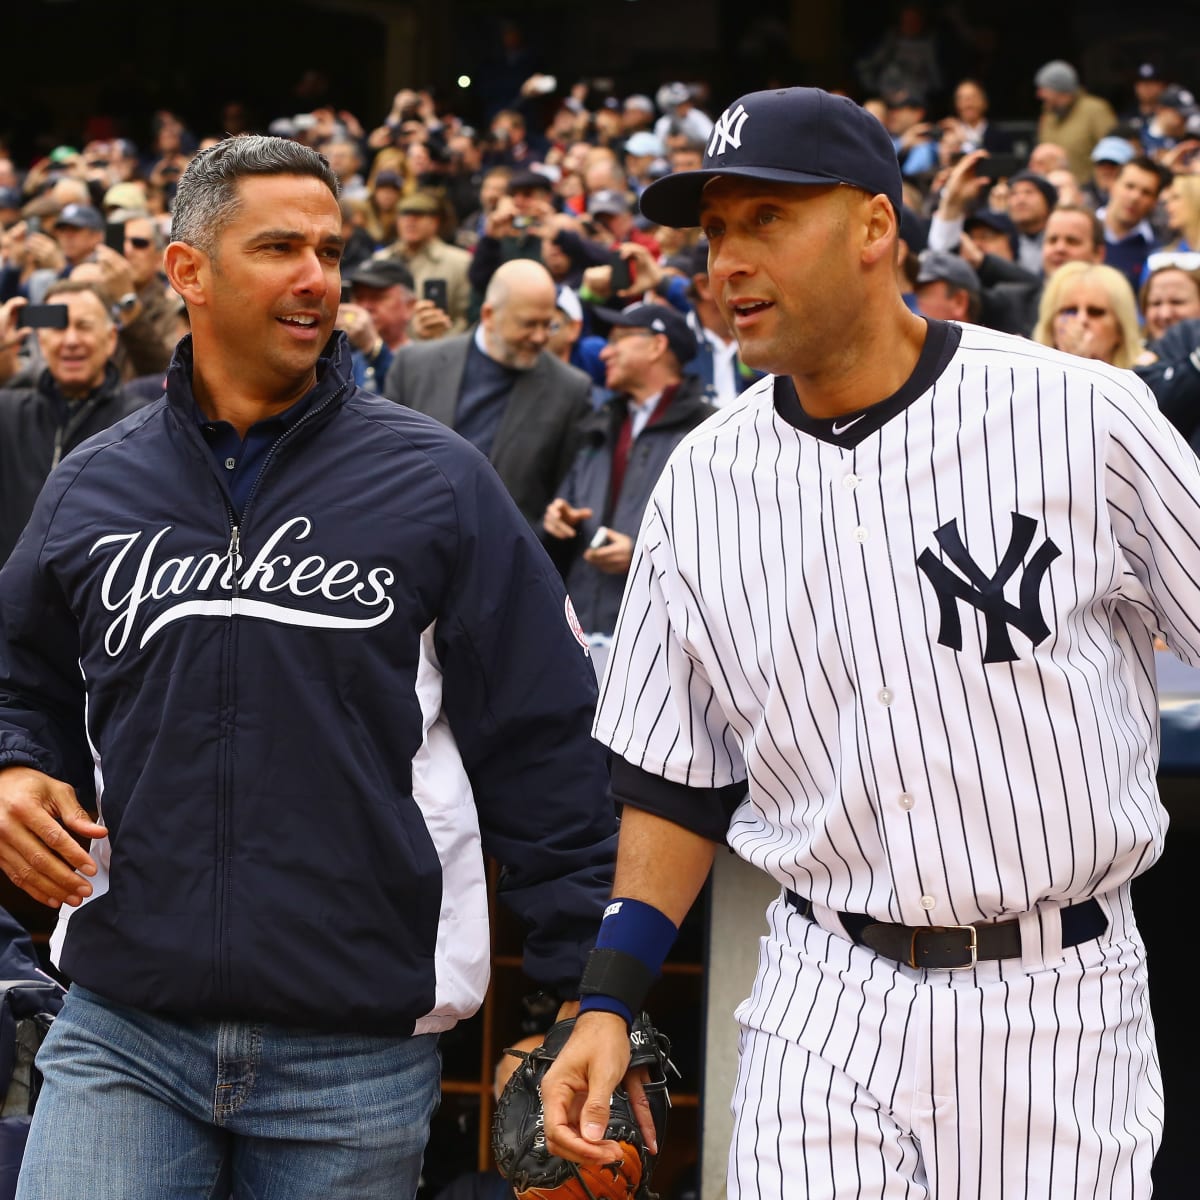 The Yankees' Jorge Posada Is a D.H., but Watch This Space - The